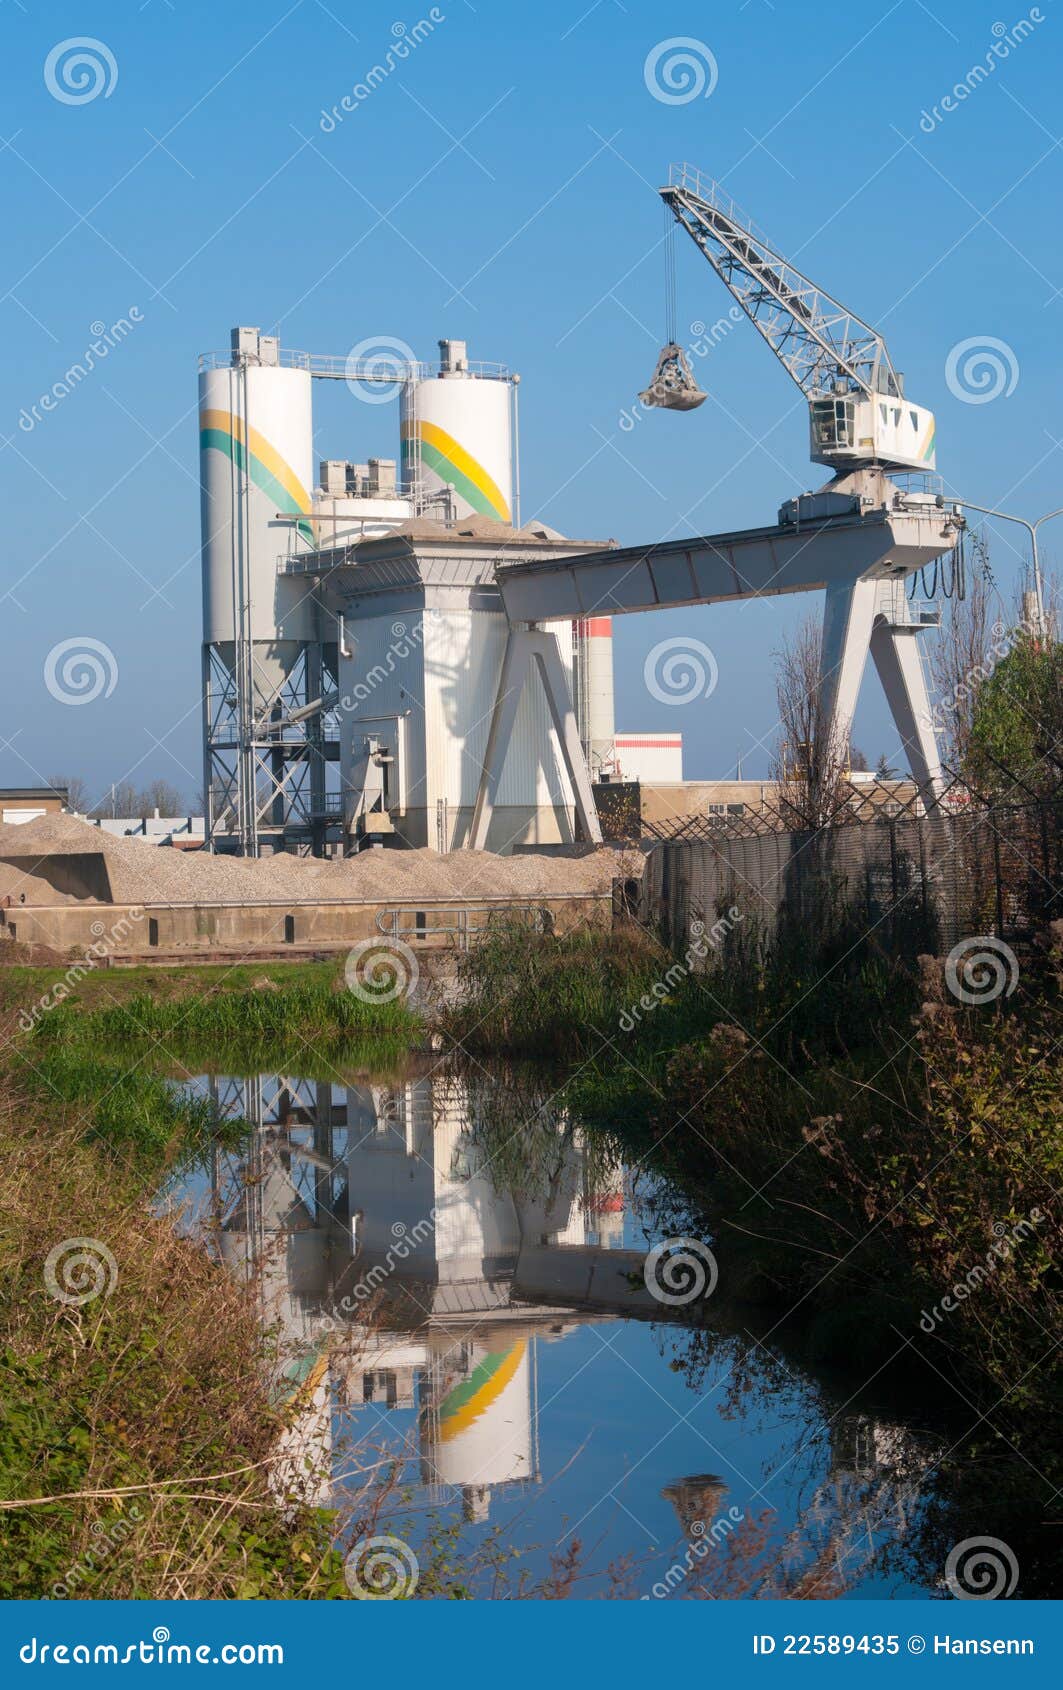 Cement factory stock image. Image of metal, produce, equipment - 22589435